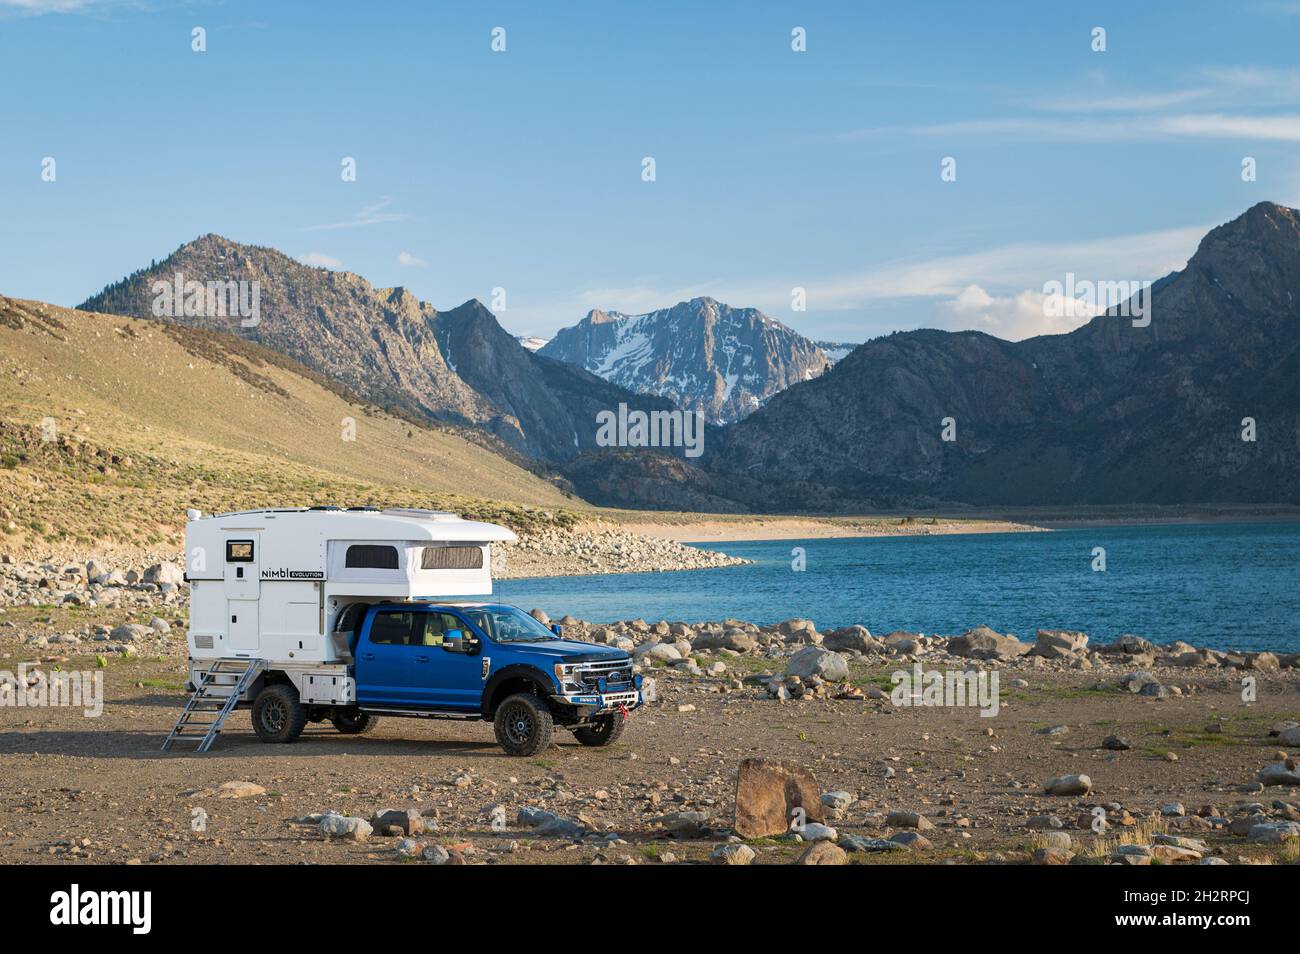 High end Overlanding off road vehicle made on a ford F350 Chassis by NIMBL vehicle company out of Auburn California, North America Stock Photo